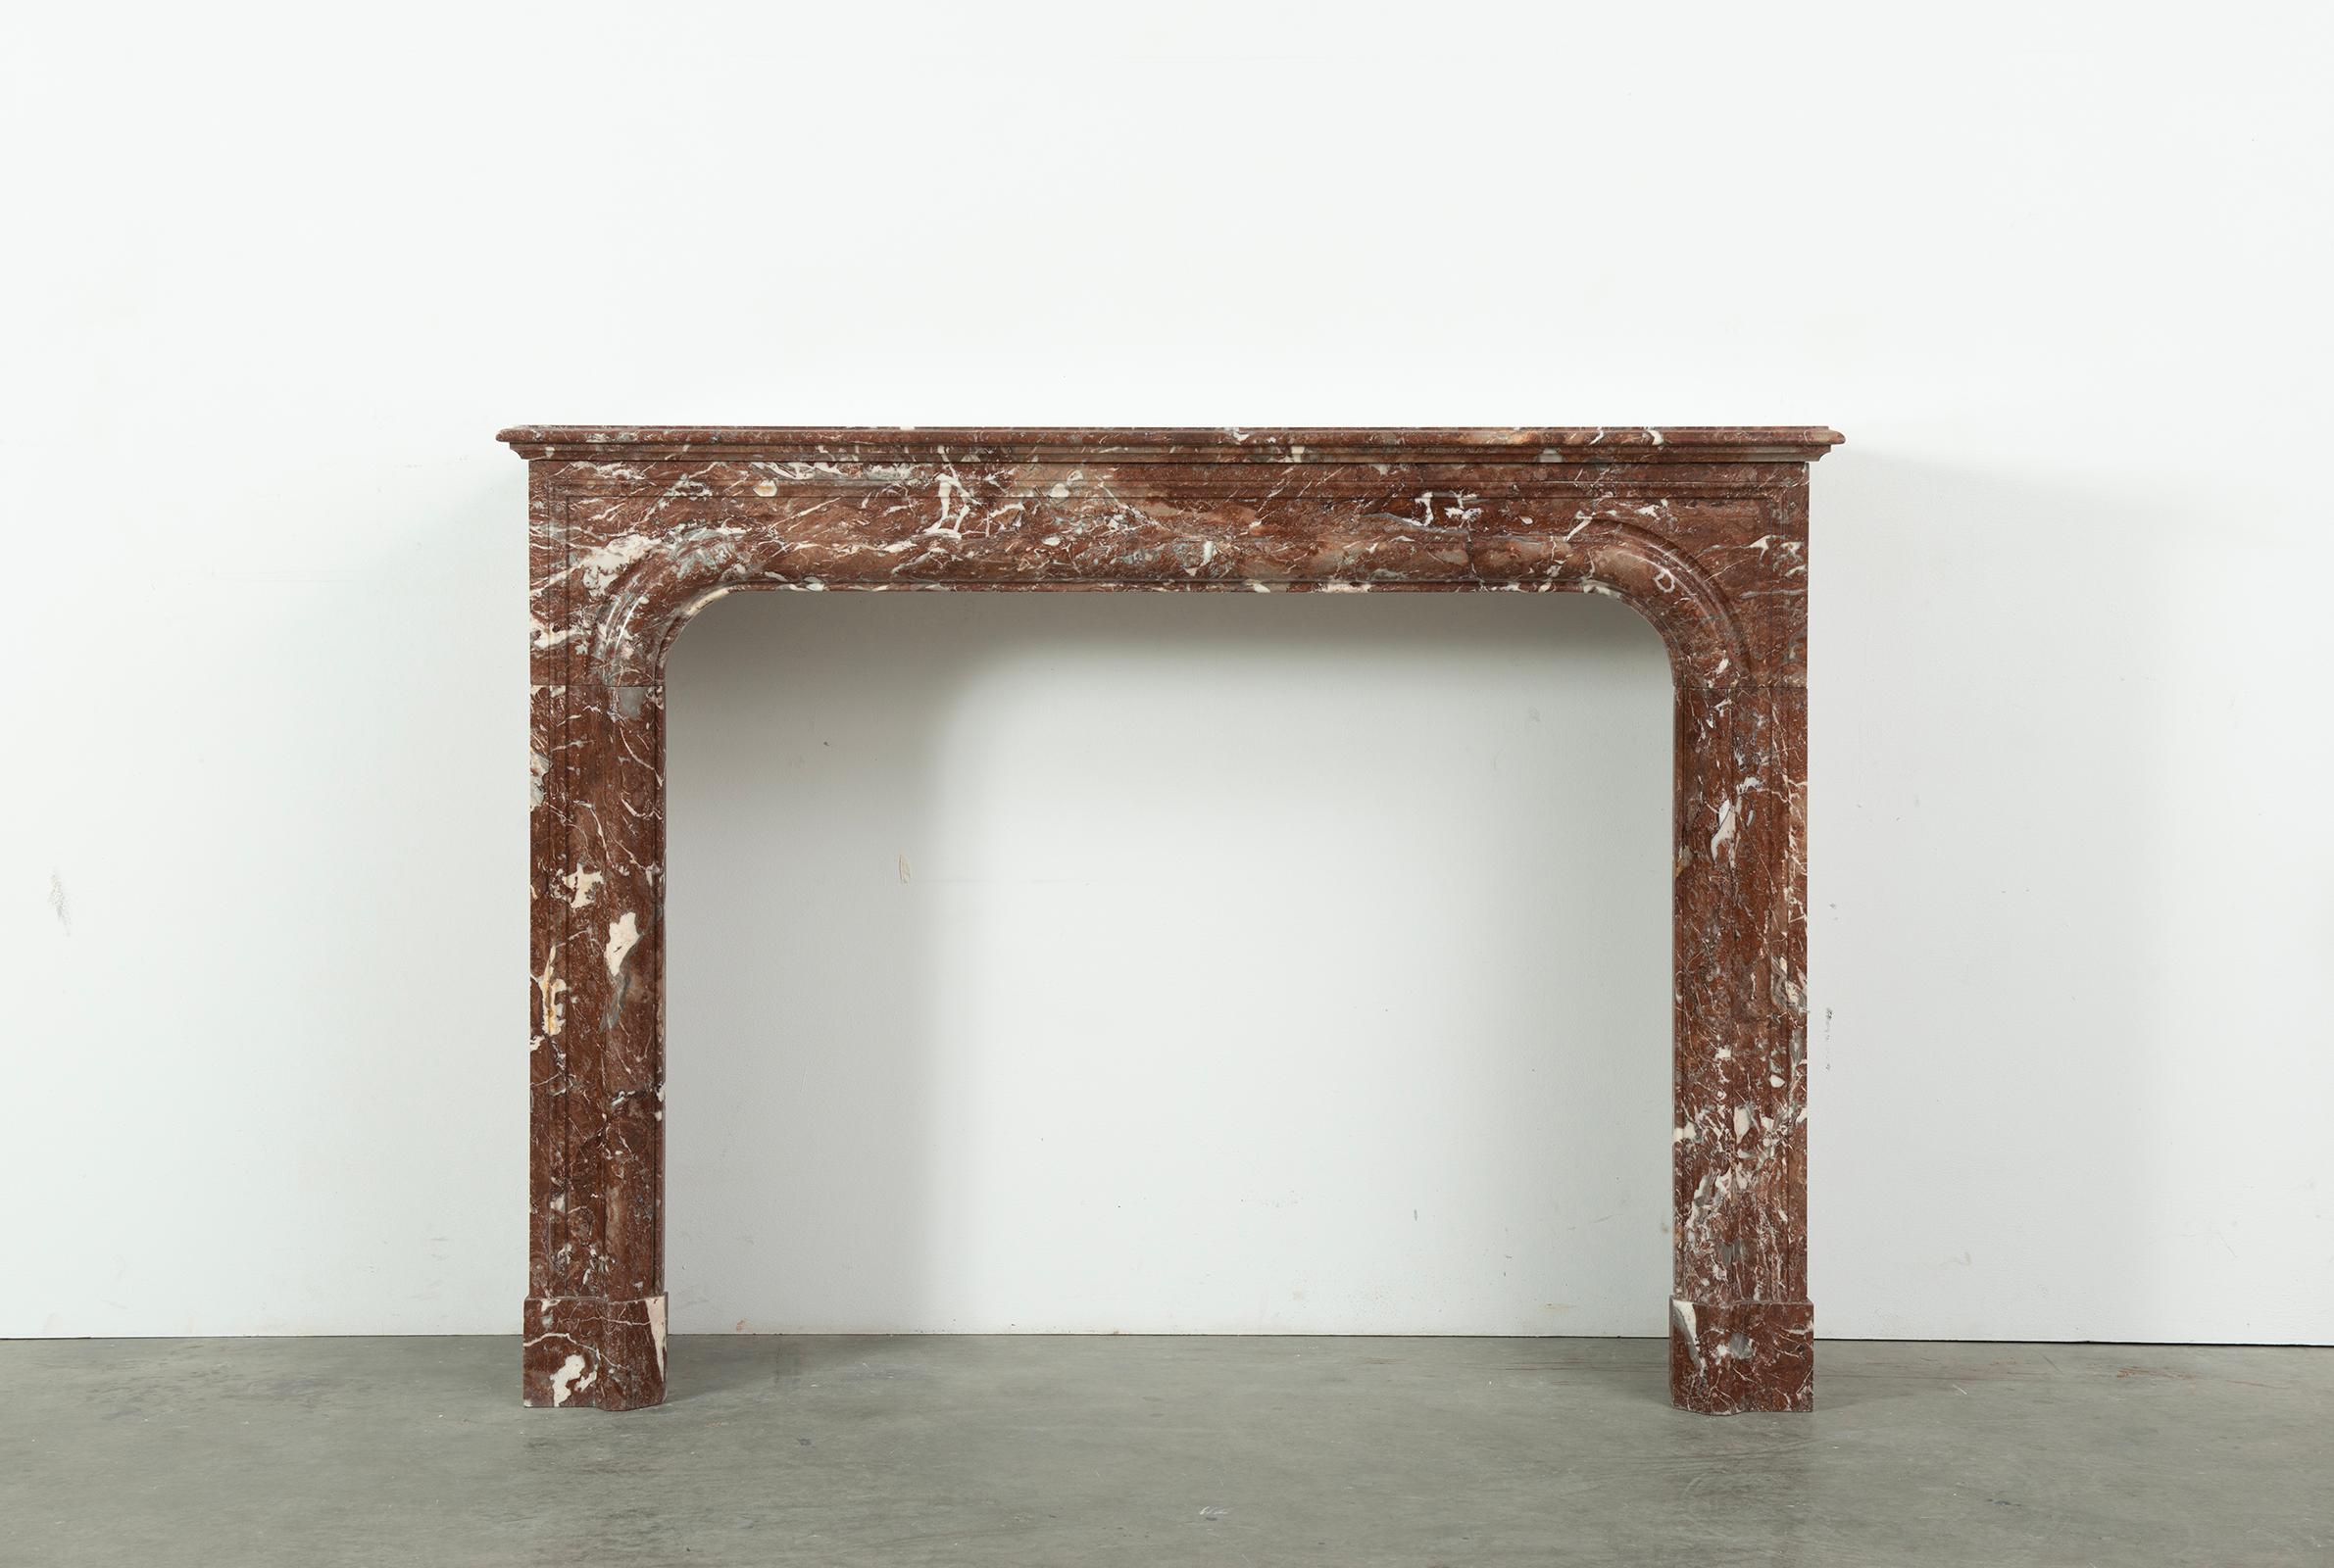 Antique Boudin Style Fireplace in warm red marble.

Lovely, simple yet elegant styled French fireplace from the 19th century.
This warm red colored manel came from a nice estate just outside of the city of Rouen.

The crisp lines and varied